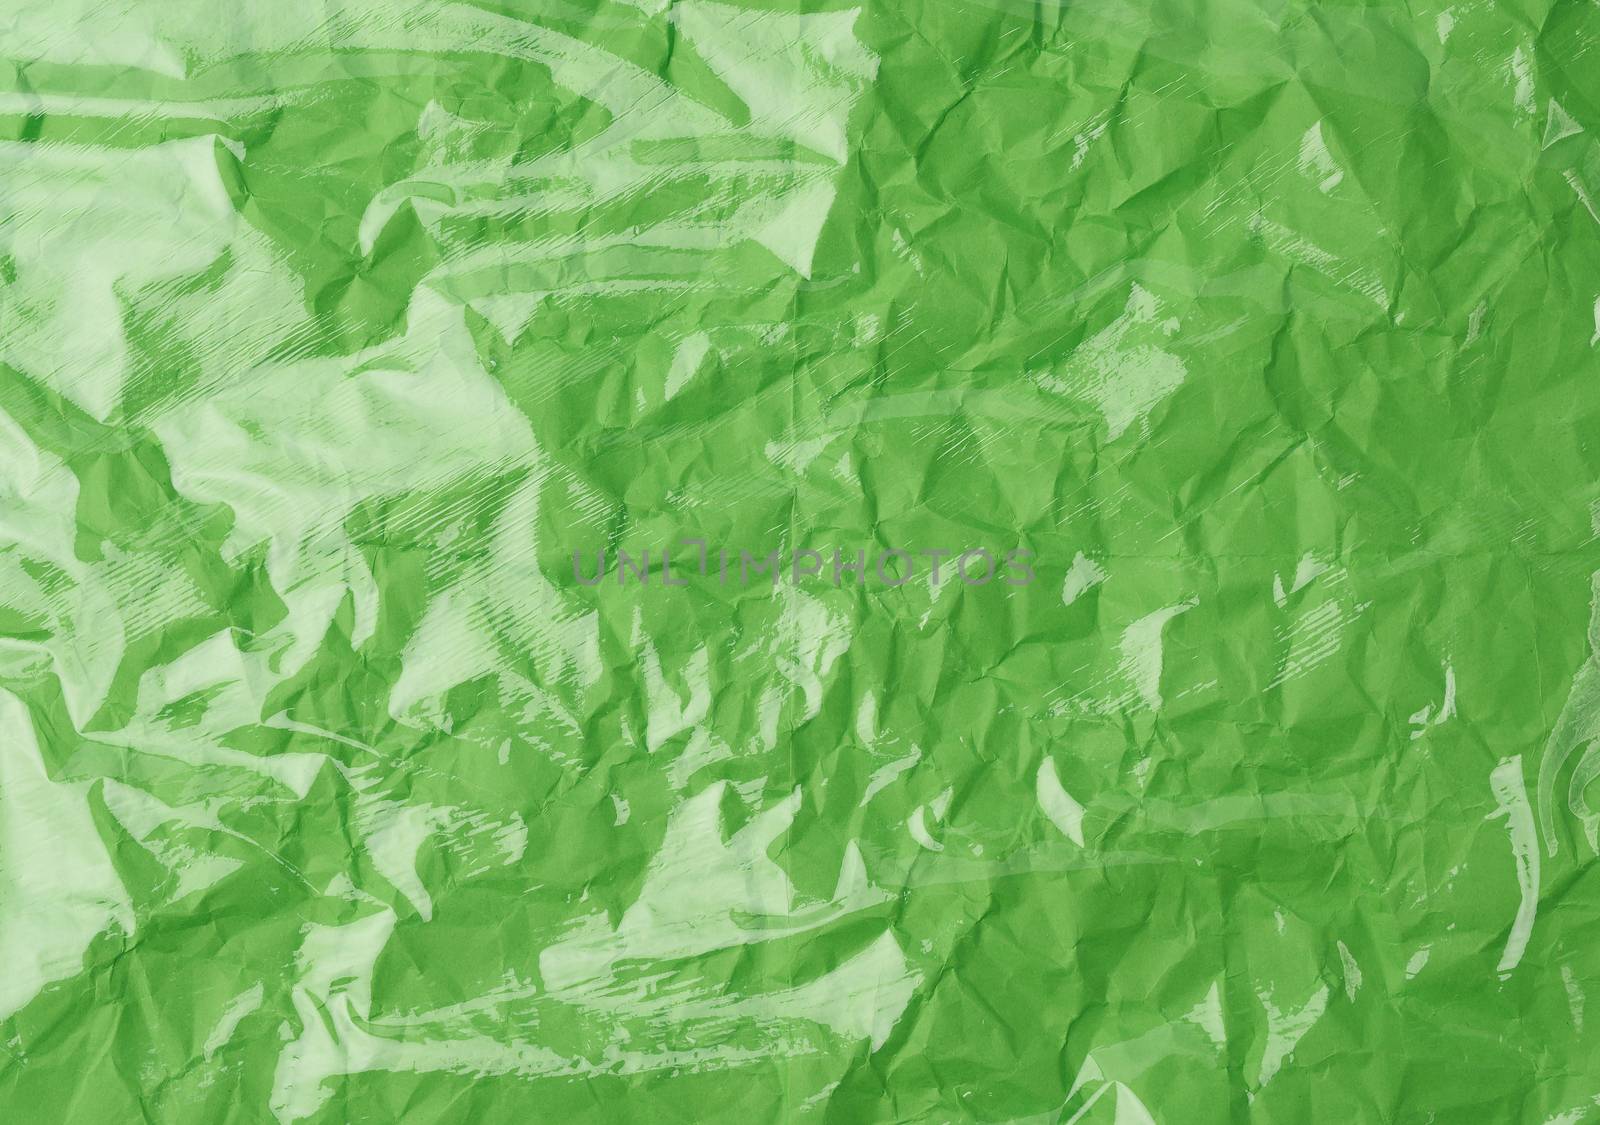 texture of a transparent stretching plastic film for packaging products on a green background, full frame, close up